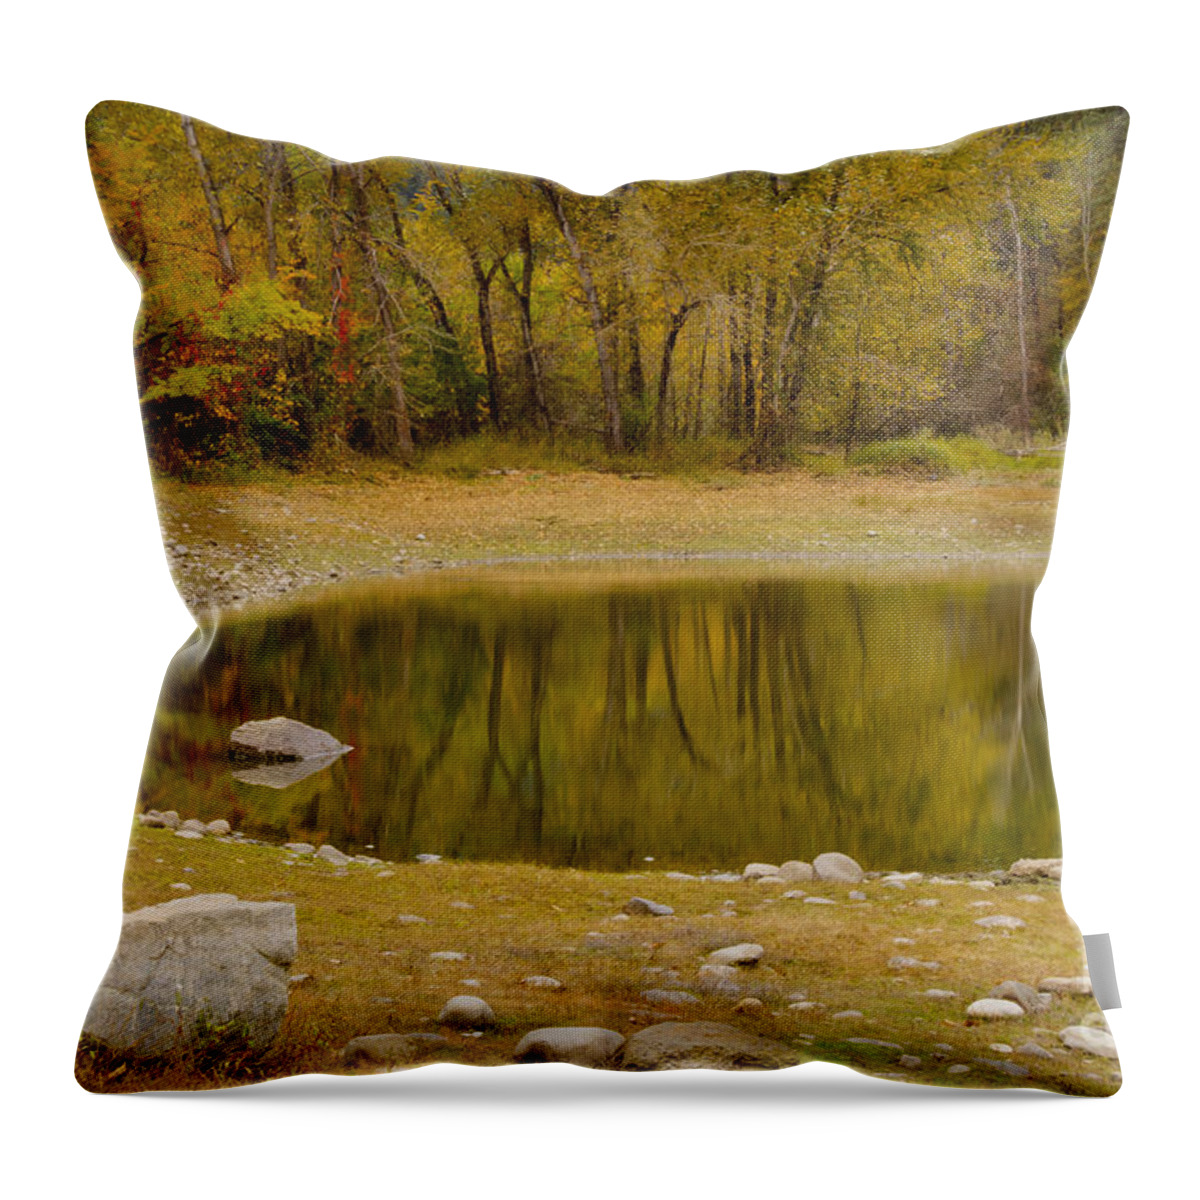 Idaho Throw Pillow featuring the photograph Tunnel Pond by Idaho Scenic Images Linda Lantzy